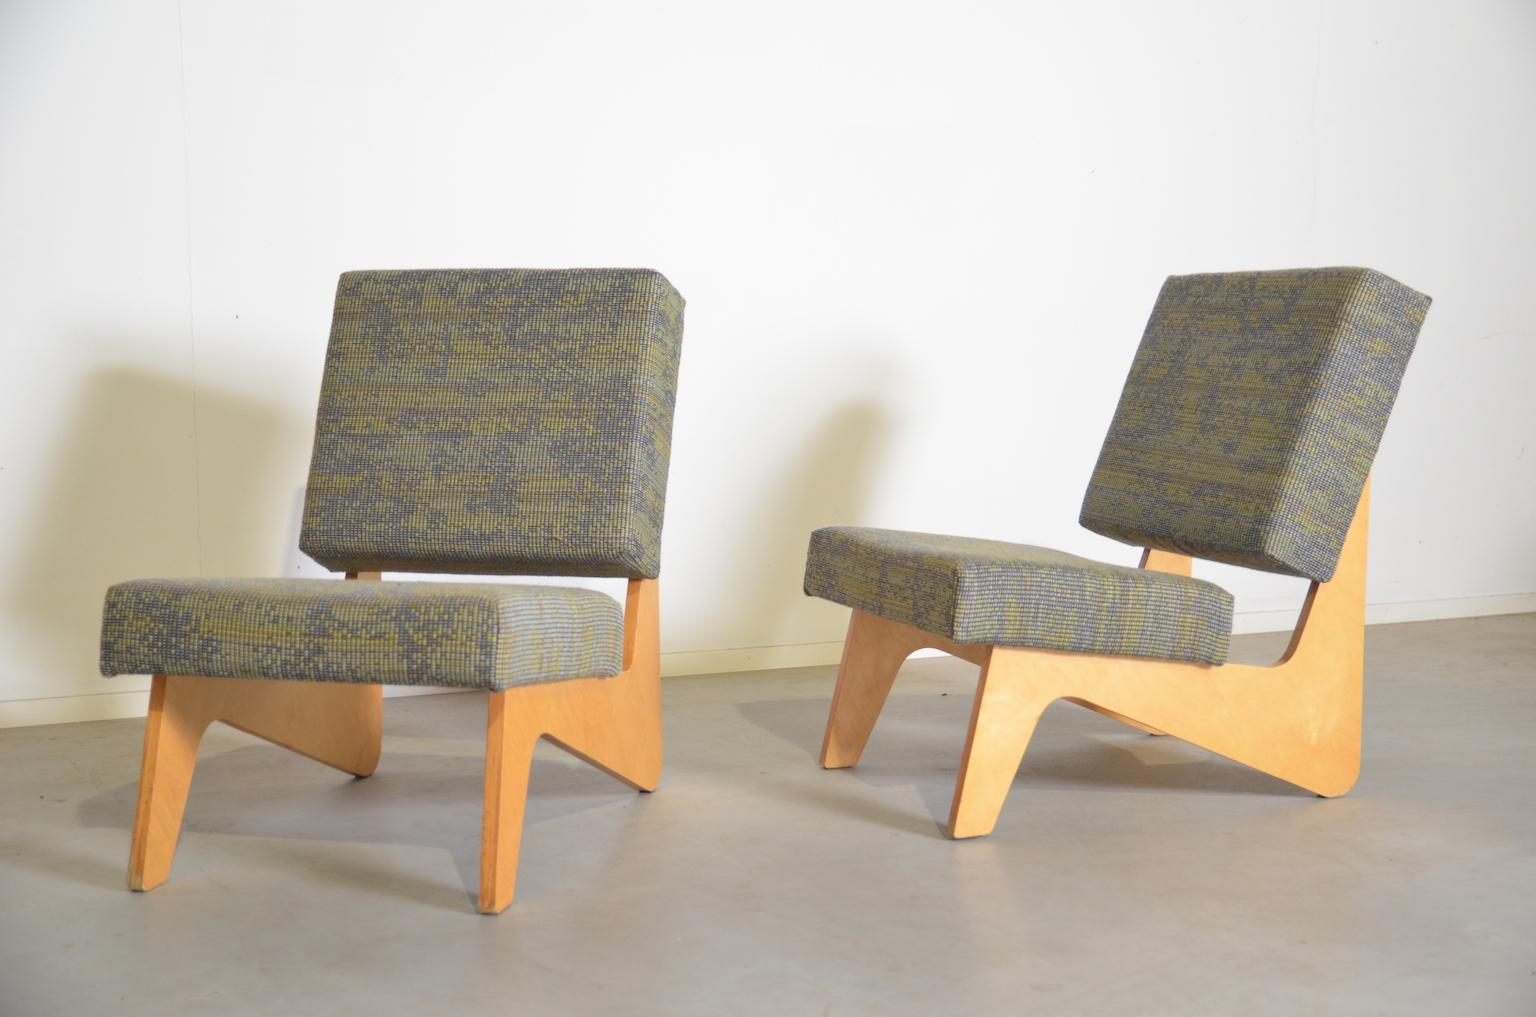 Minimalistic easy chairs bij Cees Braakman for Pastoe. A birch plywood frame with a green/blue upholstery. Seating and backrest are reupholstered (fabric: De Ploeg, Nevada 50) and have renewed foam and belts. 
One of the frames has some damages in